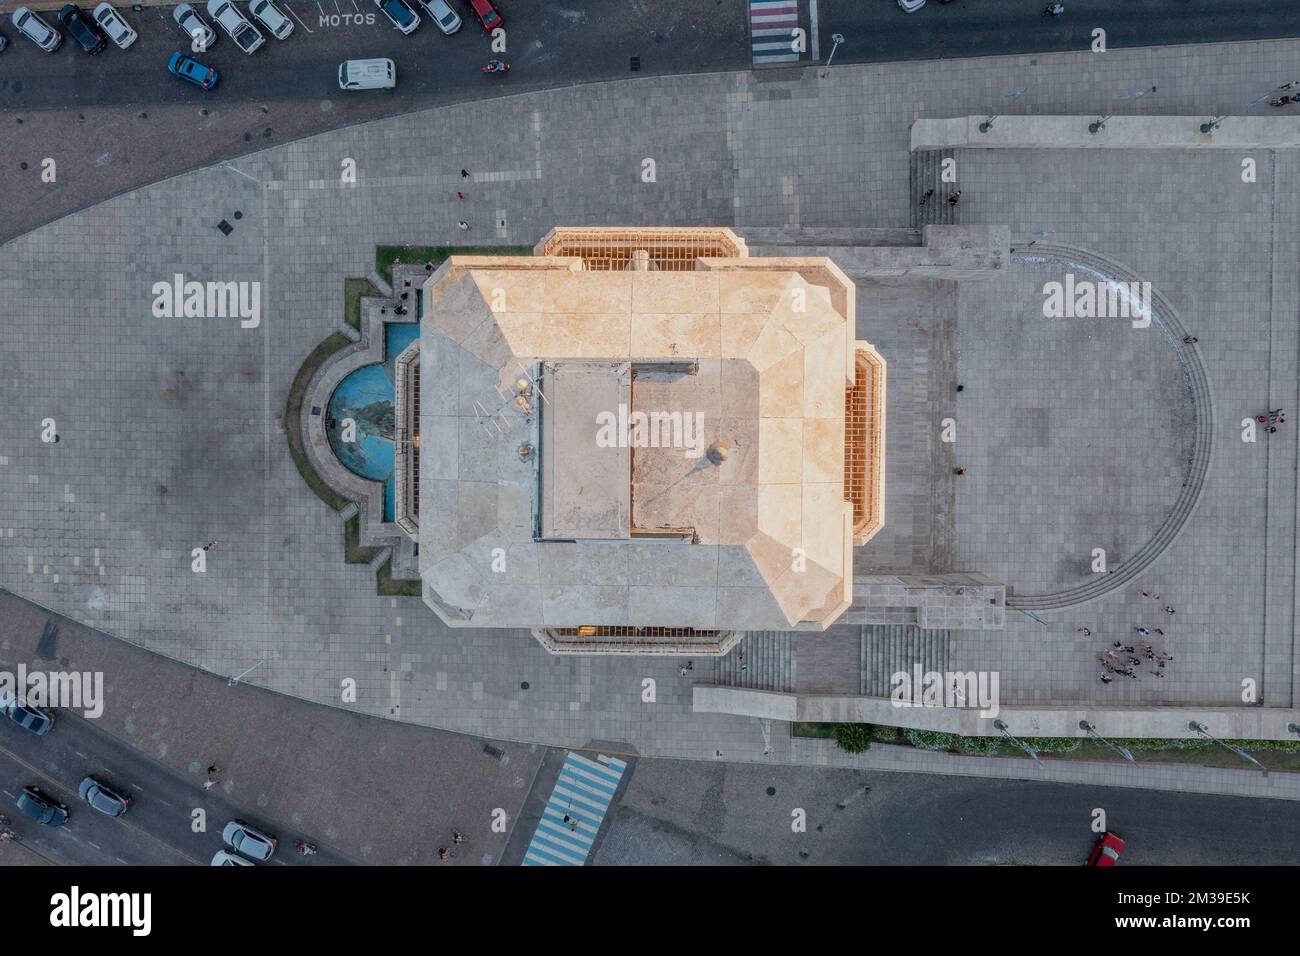 A top view of the building and the Memorial Flag in Rosario, Santa Fe, Argetina Stock Photo